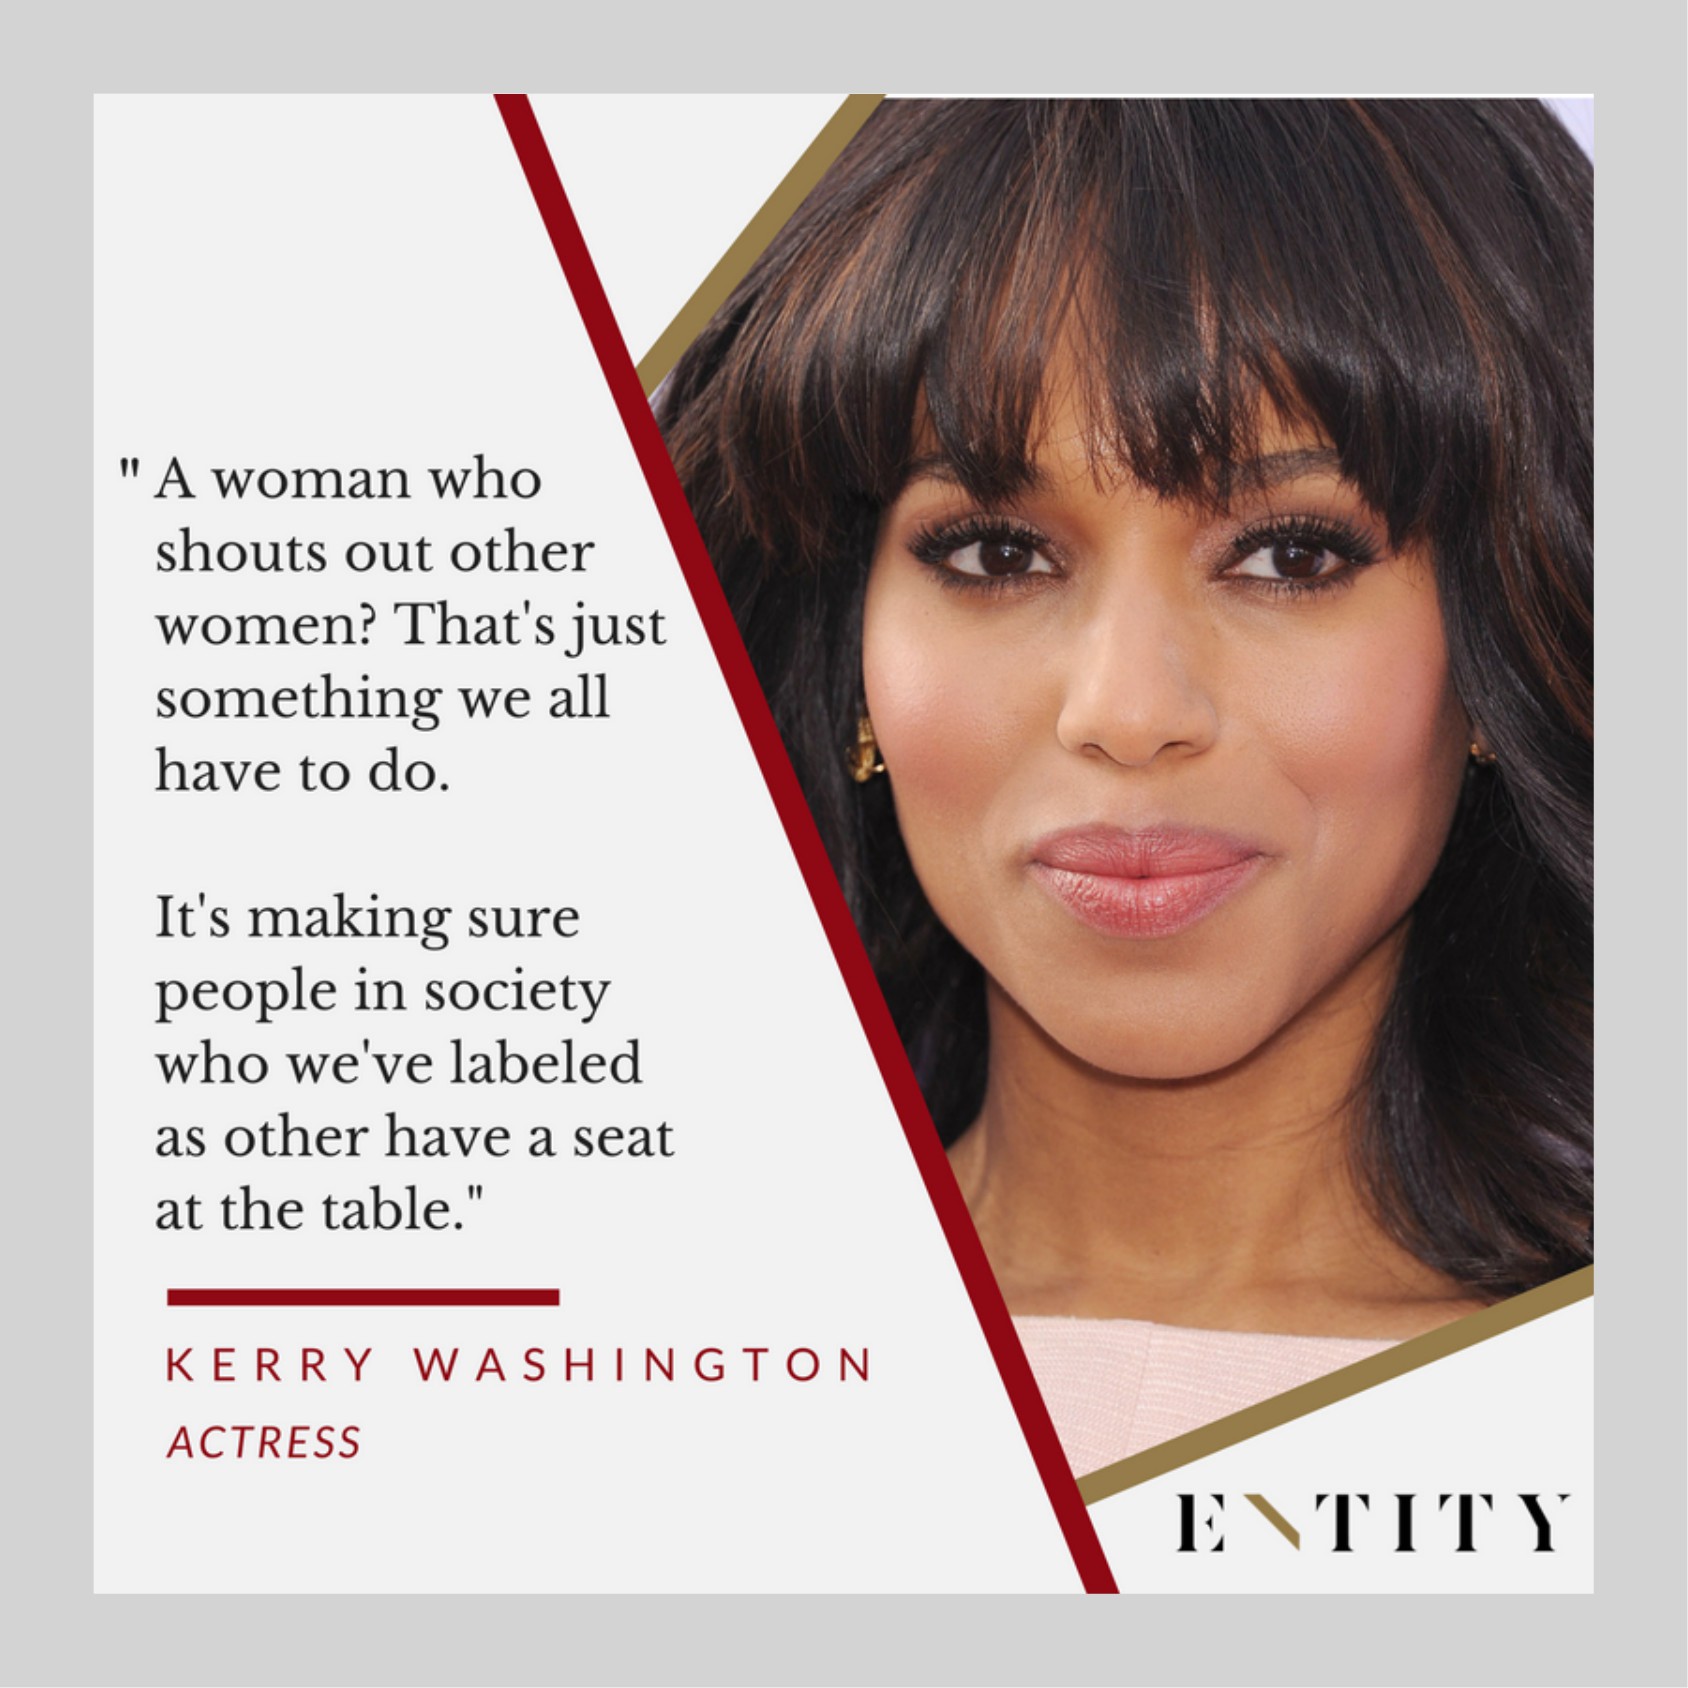 These Kerry Washington Quotes Call out for Diversity in the Film Industry